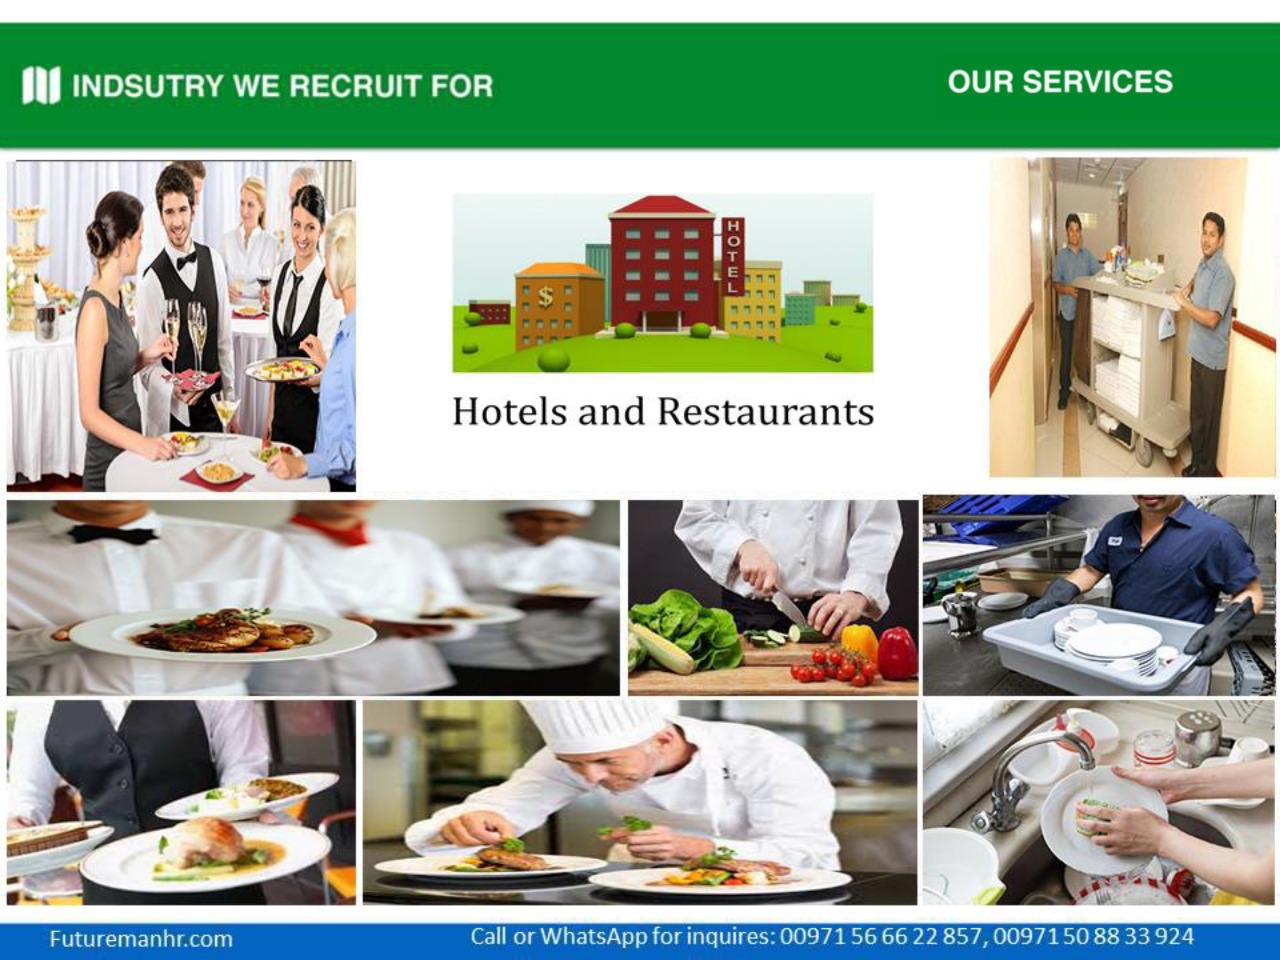 Hotel and Restaurants (2500 Applicant Available)